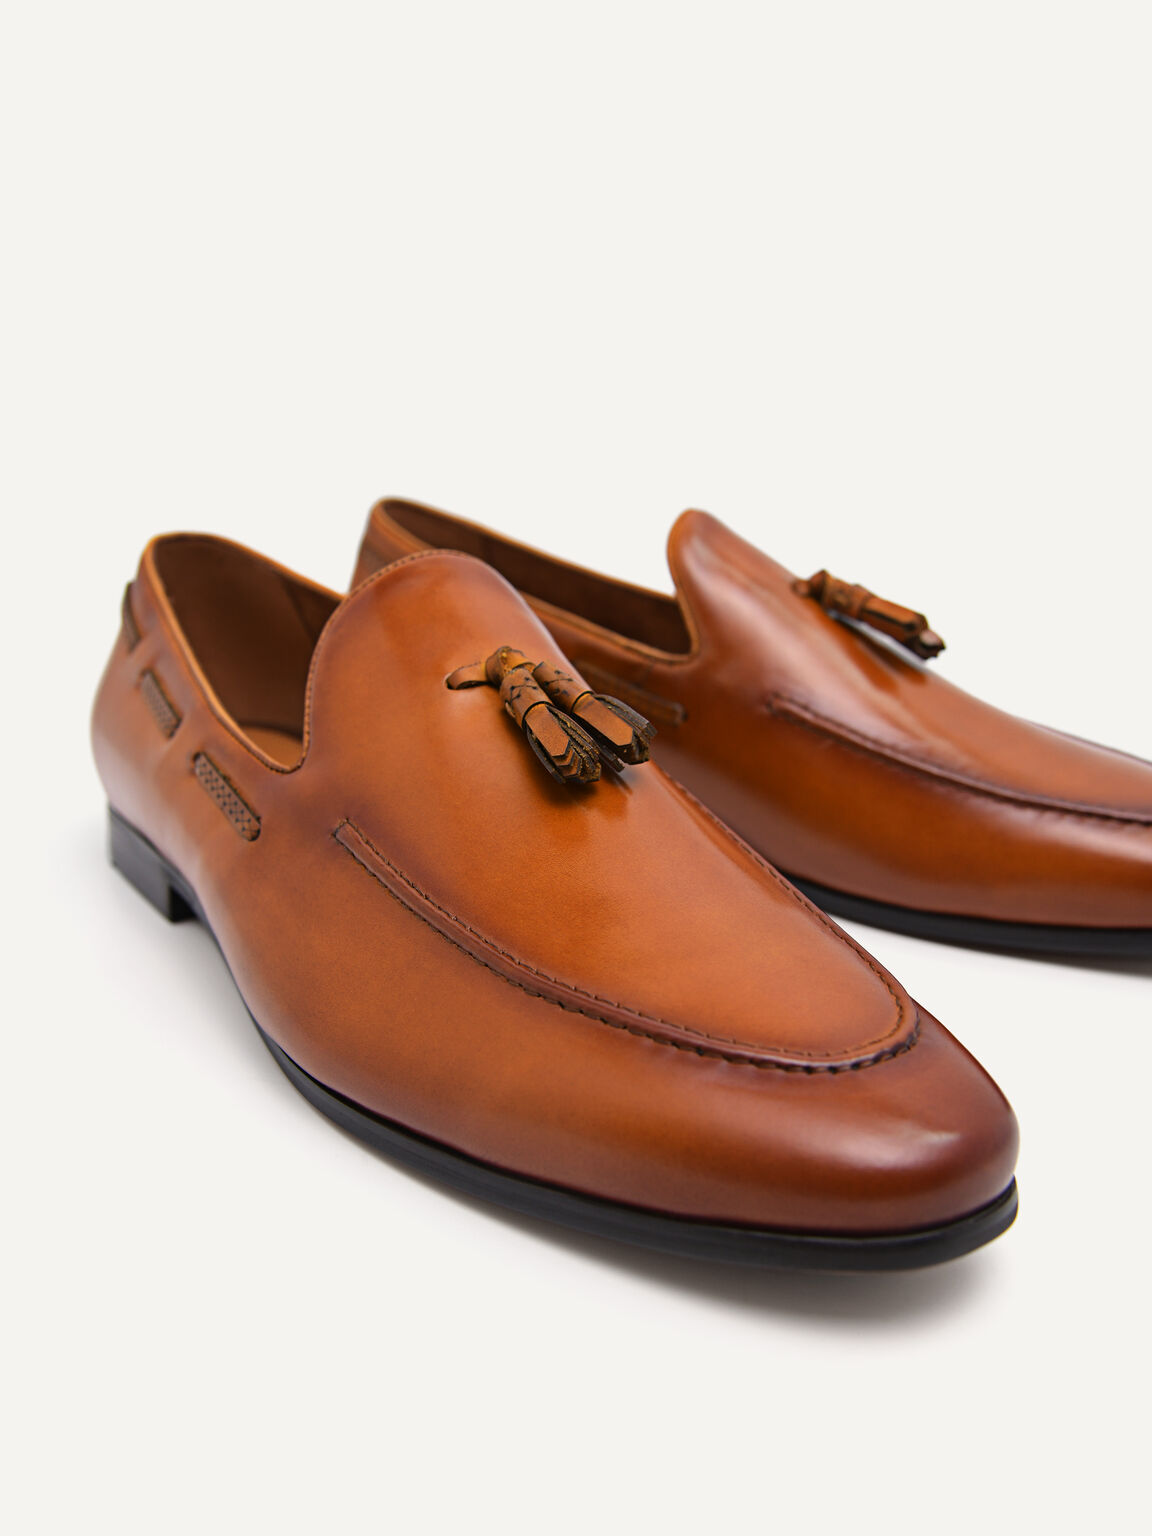 Leather Tasselled Loafers, Camel